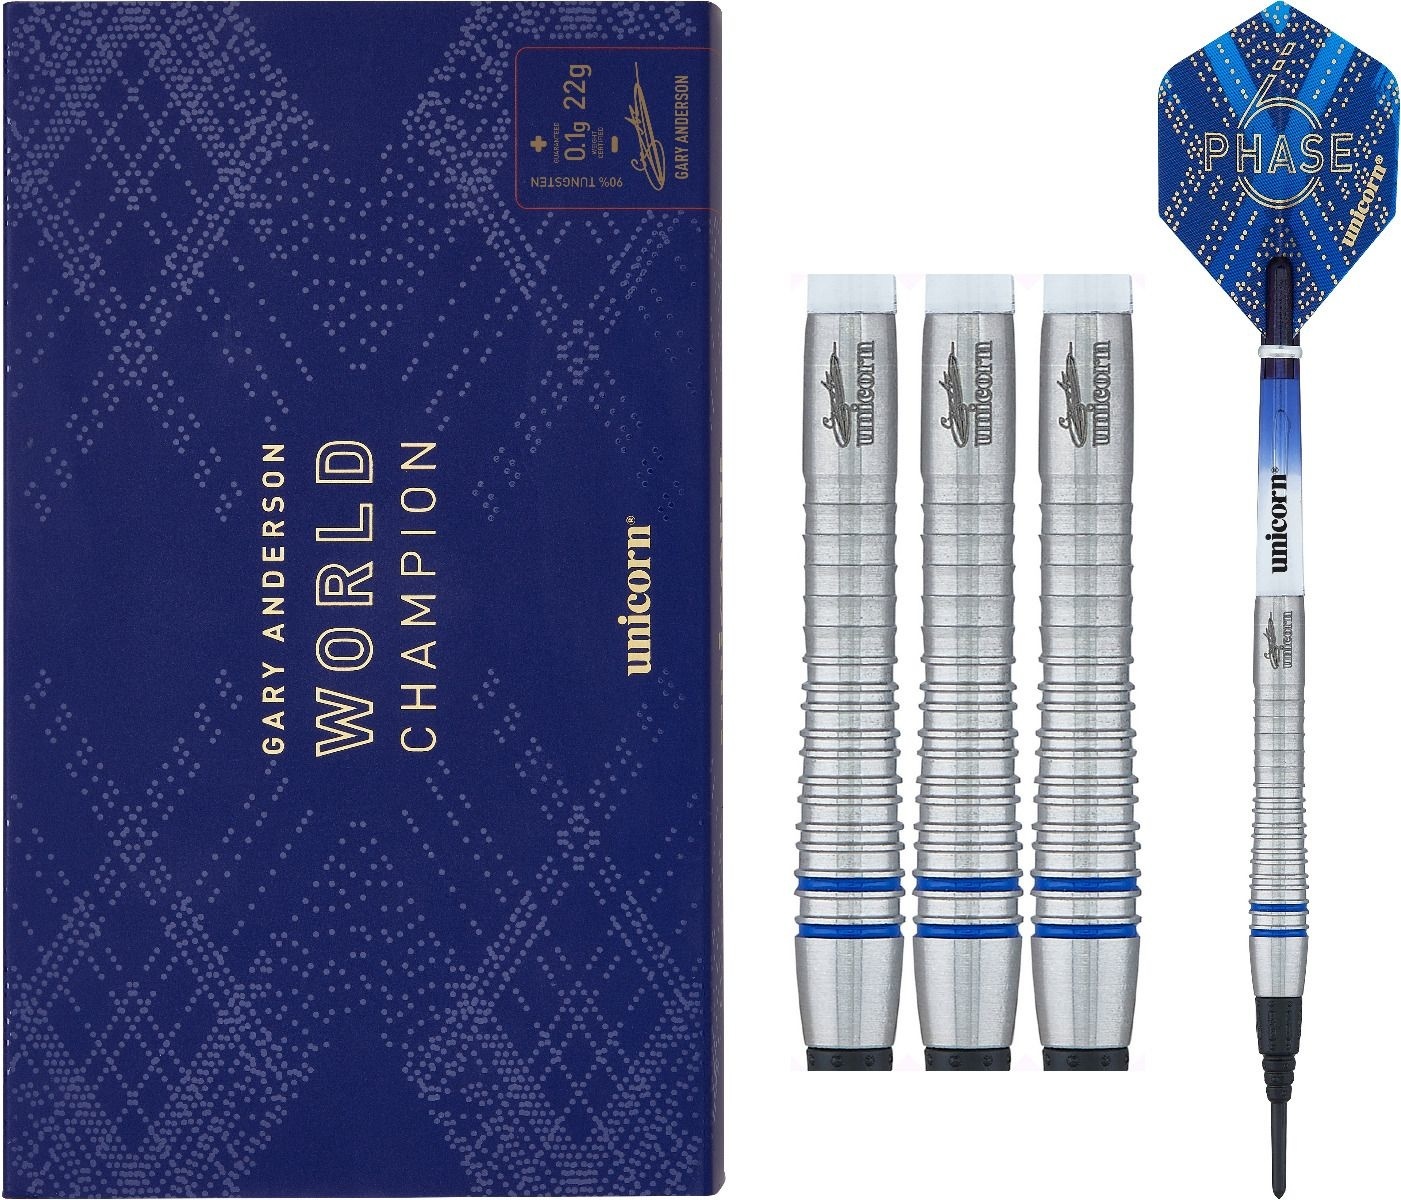 GARY ANDERSON PHASE6 Soft Tip 18G - ダーツ